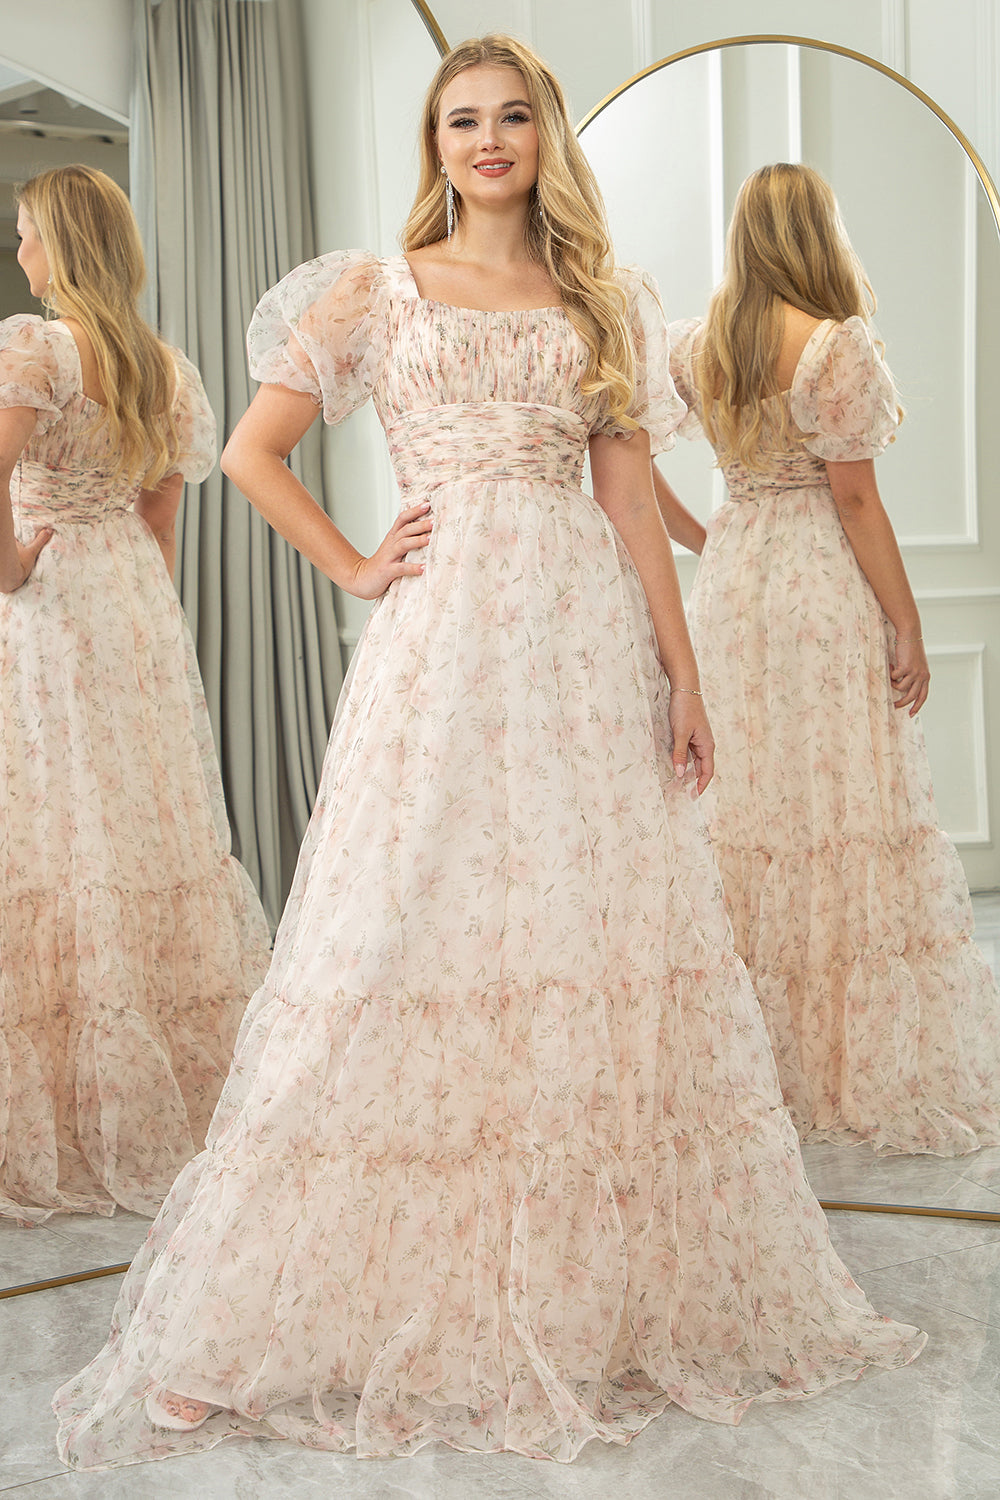 Champagne Printed A-line Square Neck Long Prom Dress